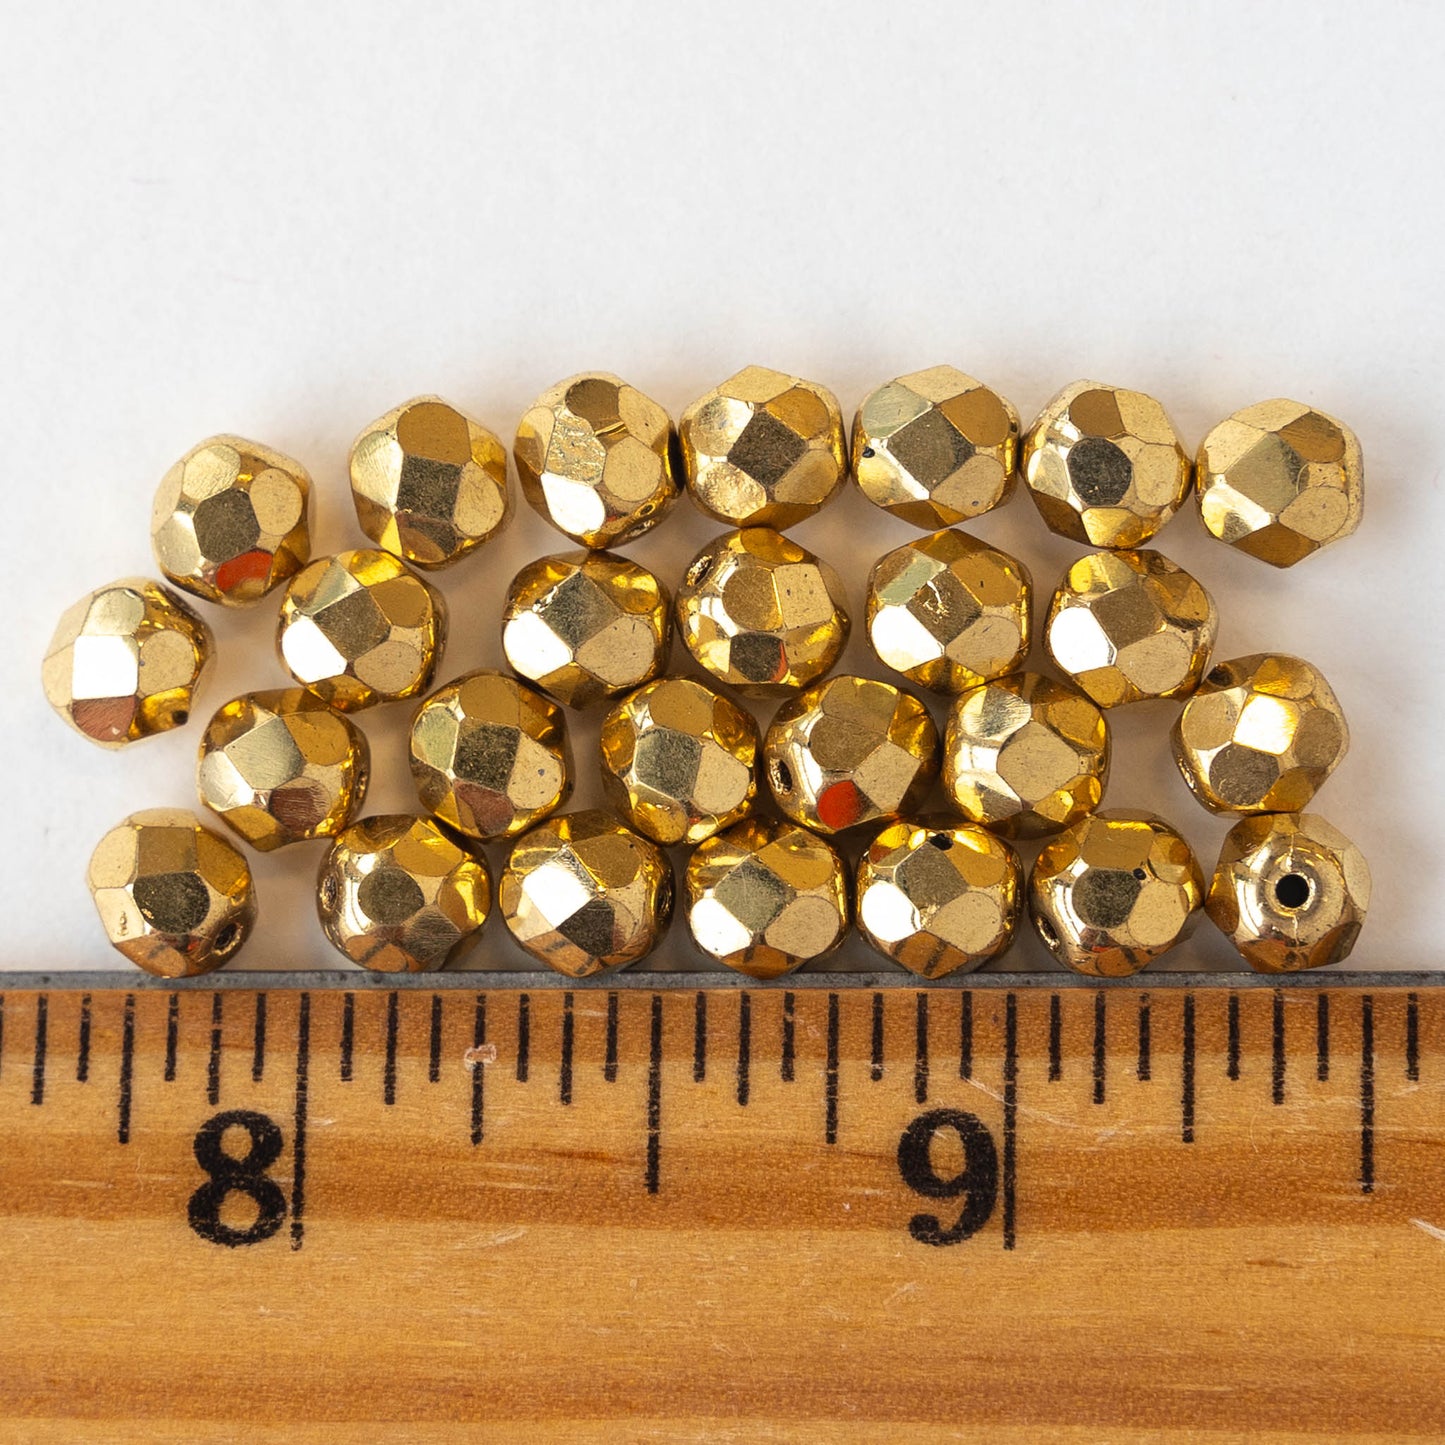 6mm Faceted Round Beads - Sparkly Gold - 25 beads